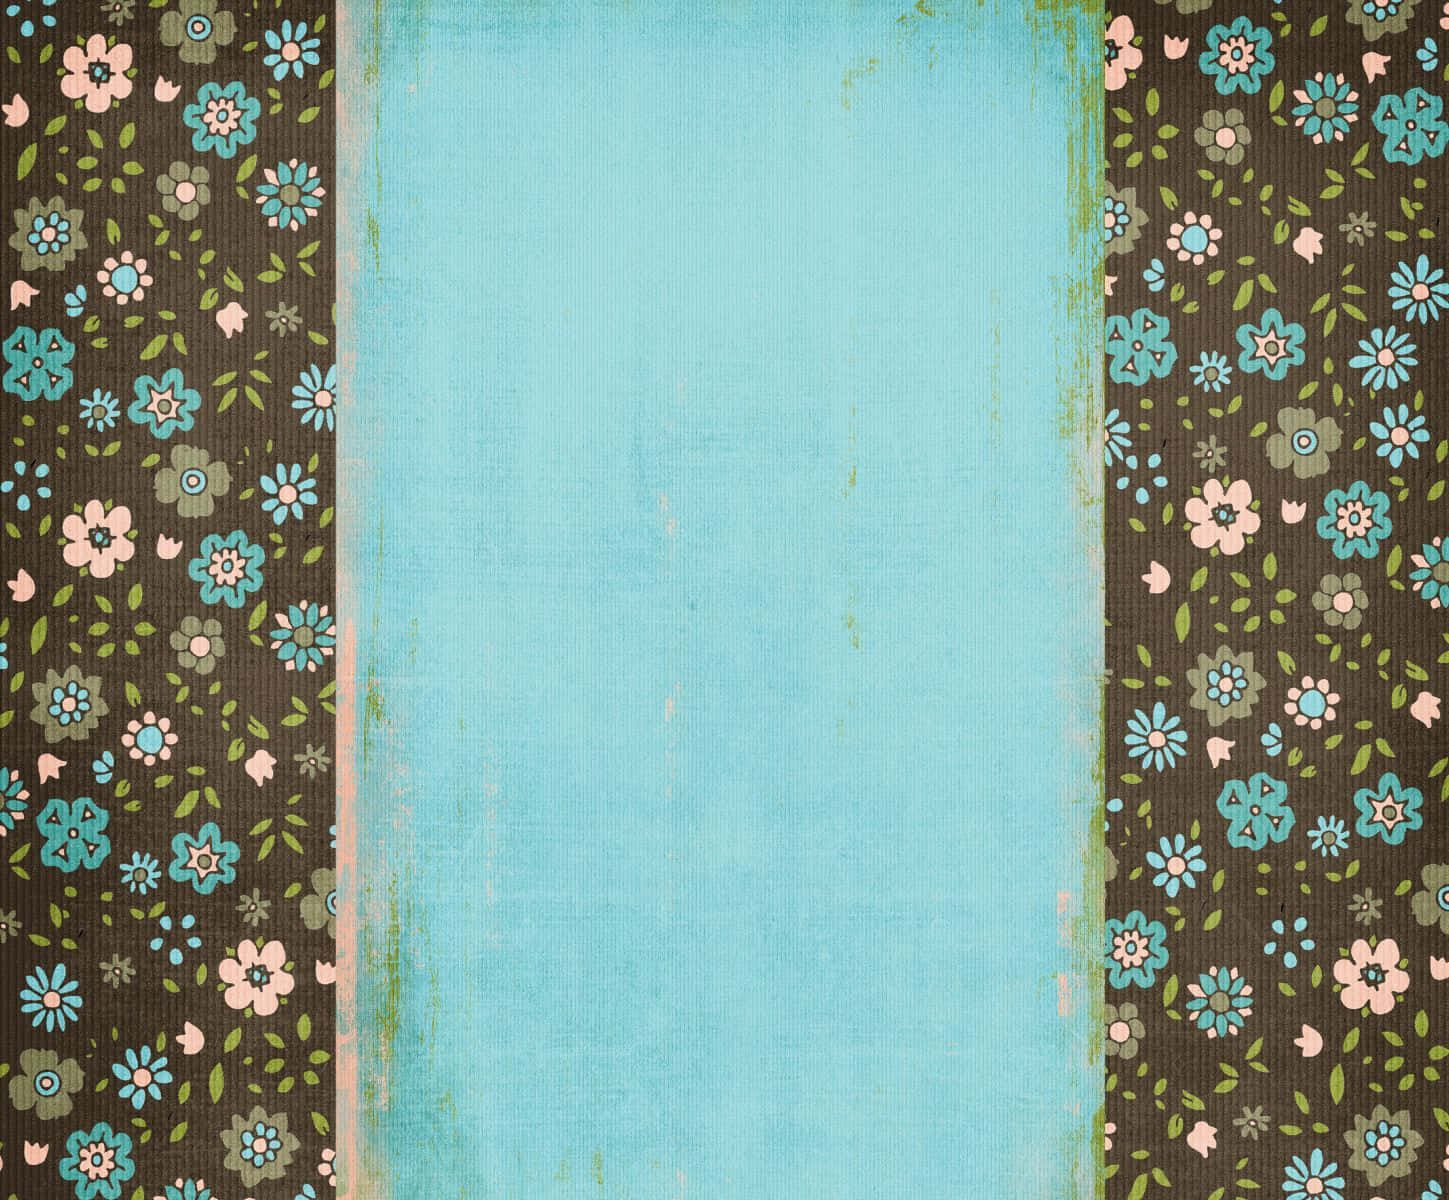 A Blue And Brown Background With Flowers